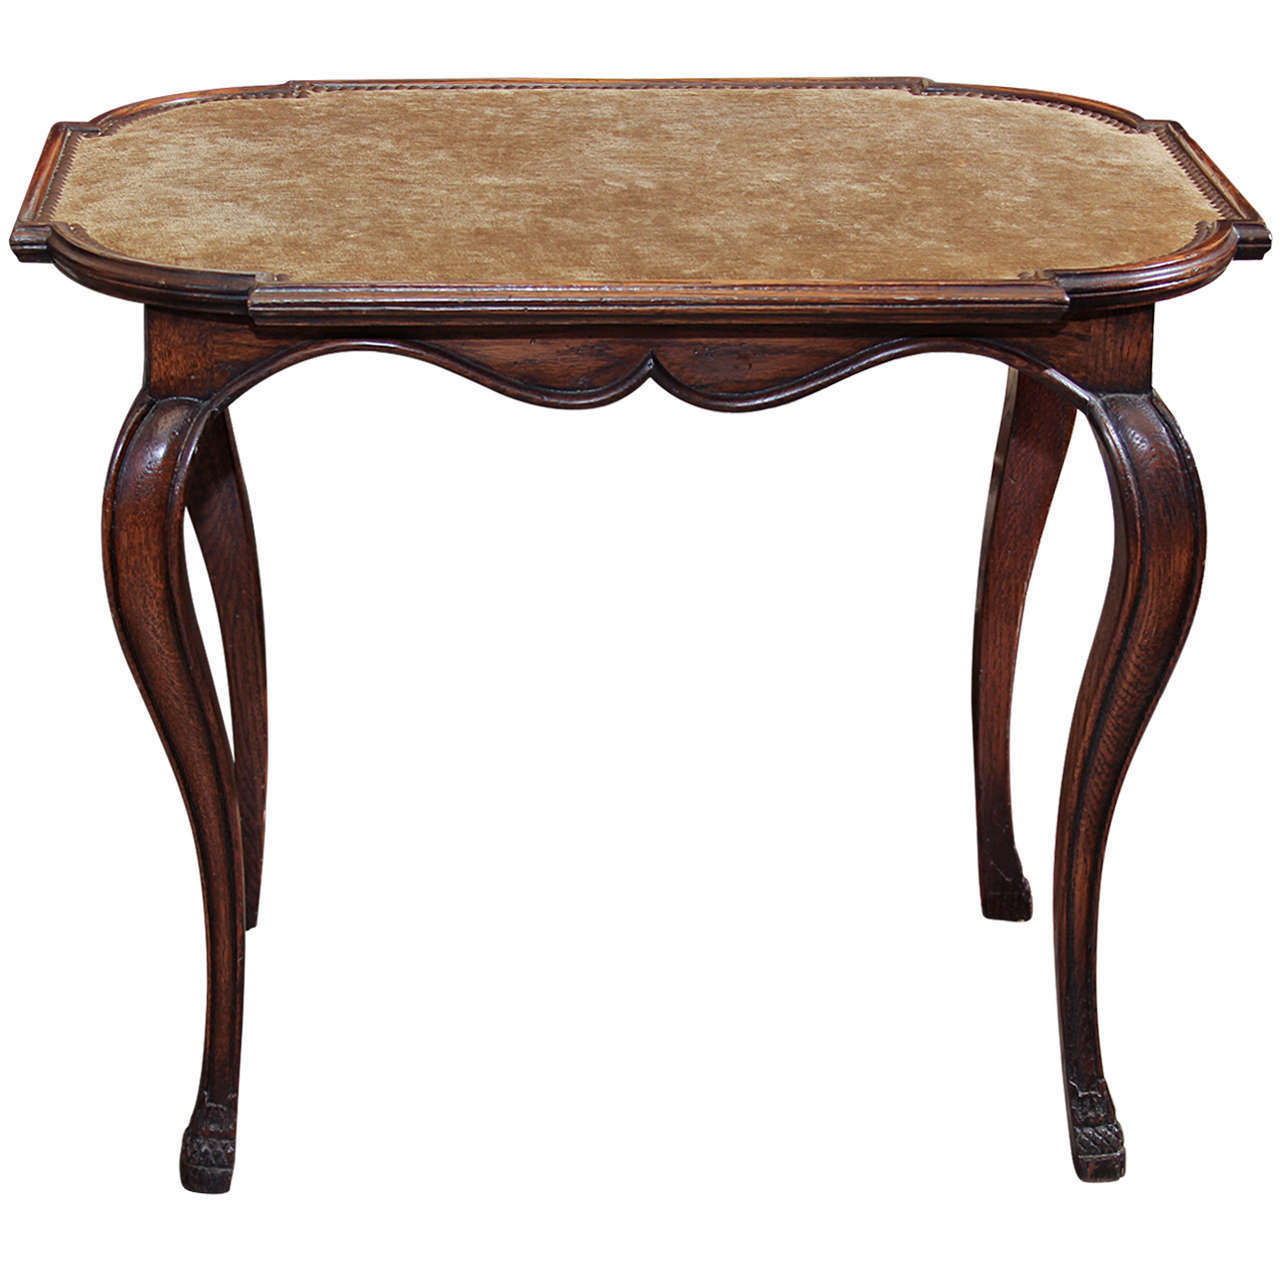 Table With Upholstered Top For Sale